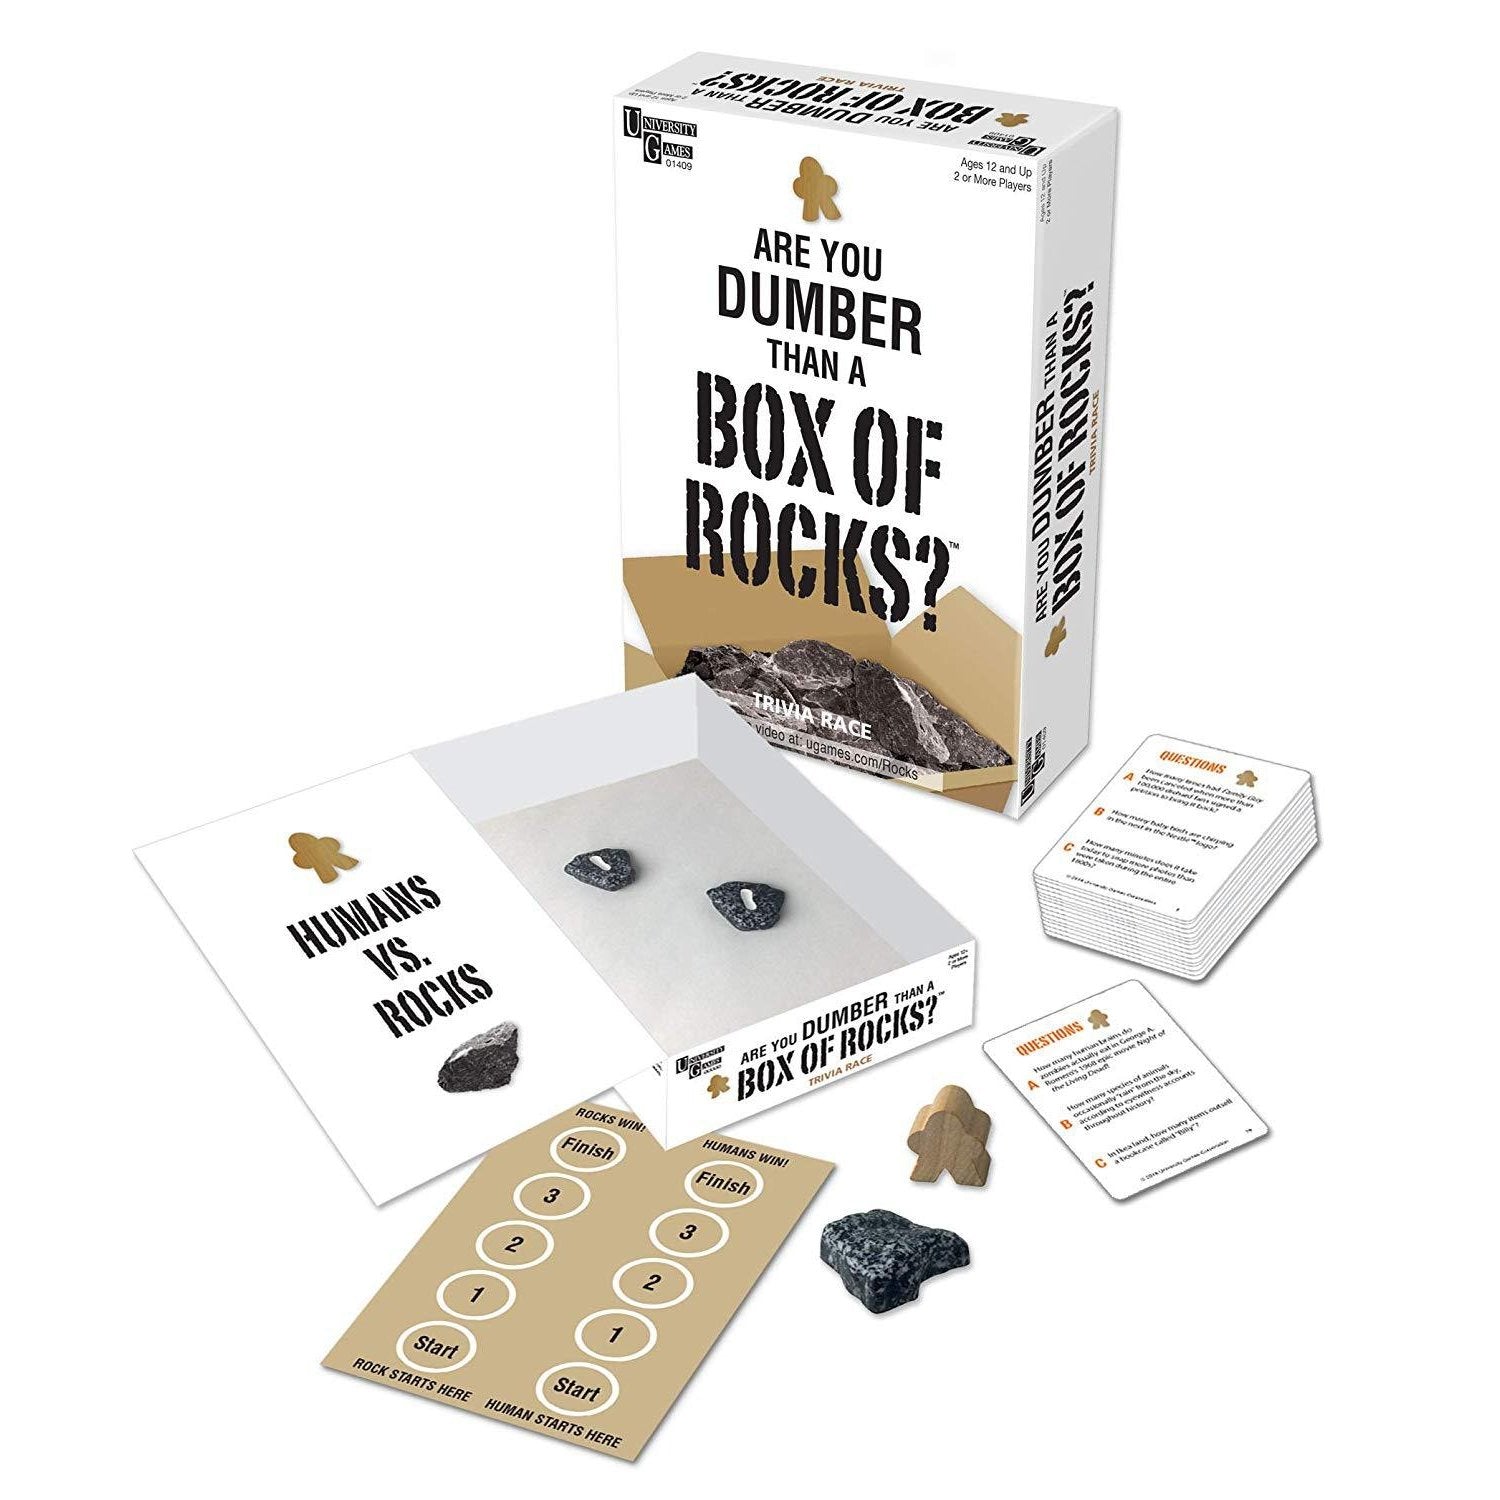 Are You Dumber than a Box of Rocks? - Game-Yarrawonga Fun and Games